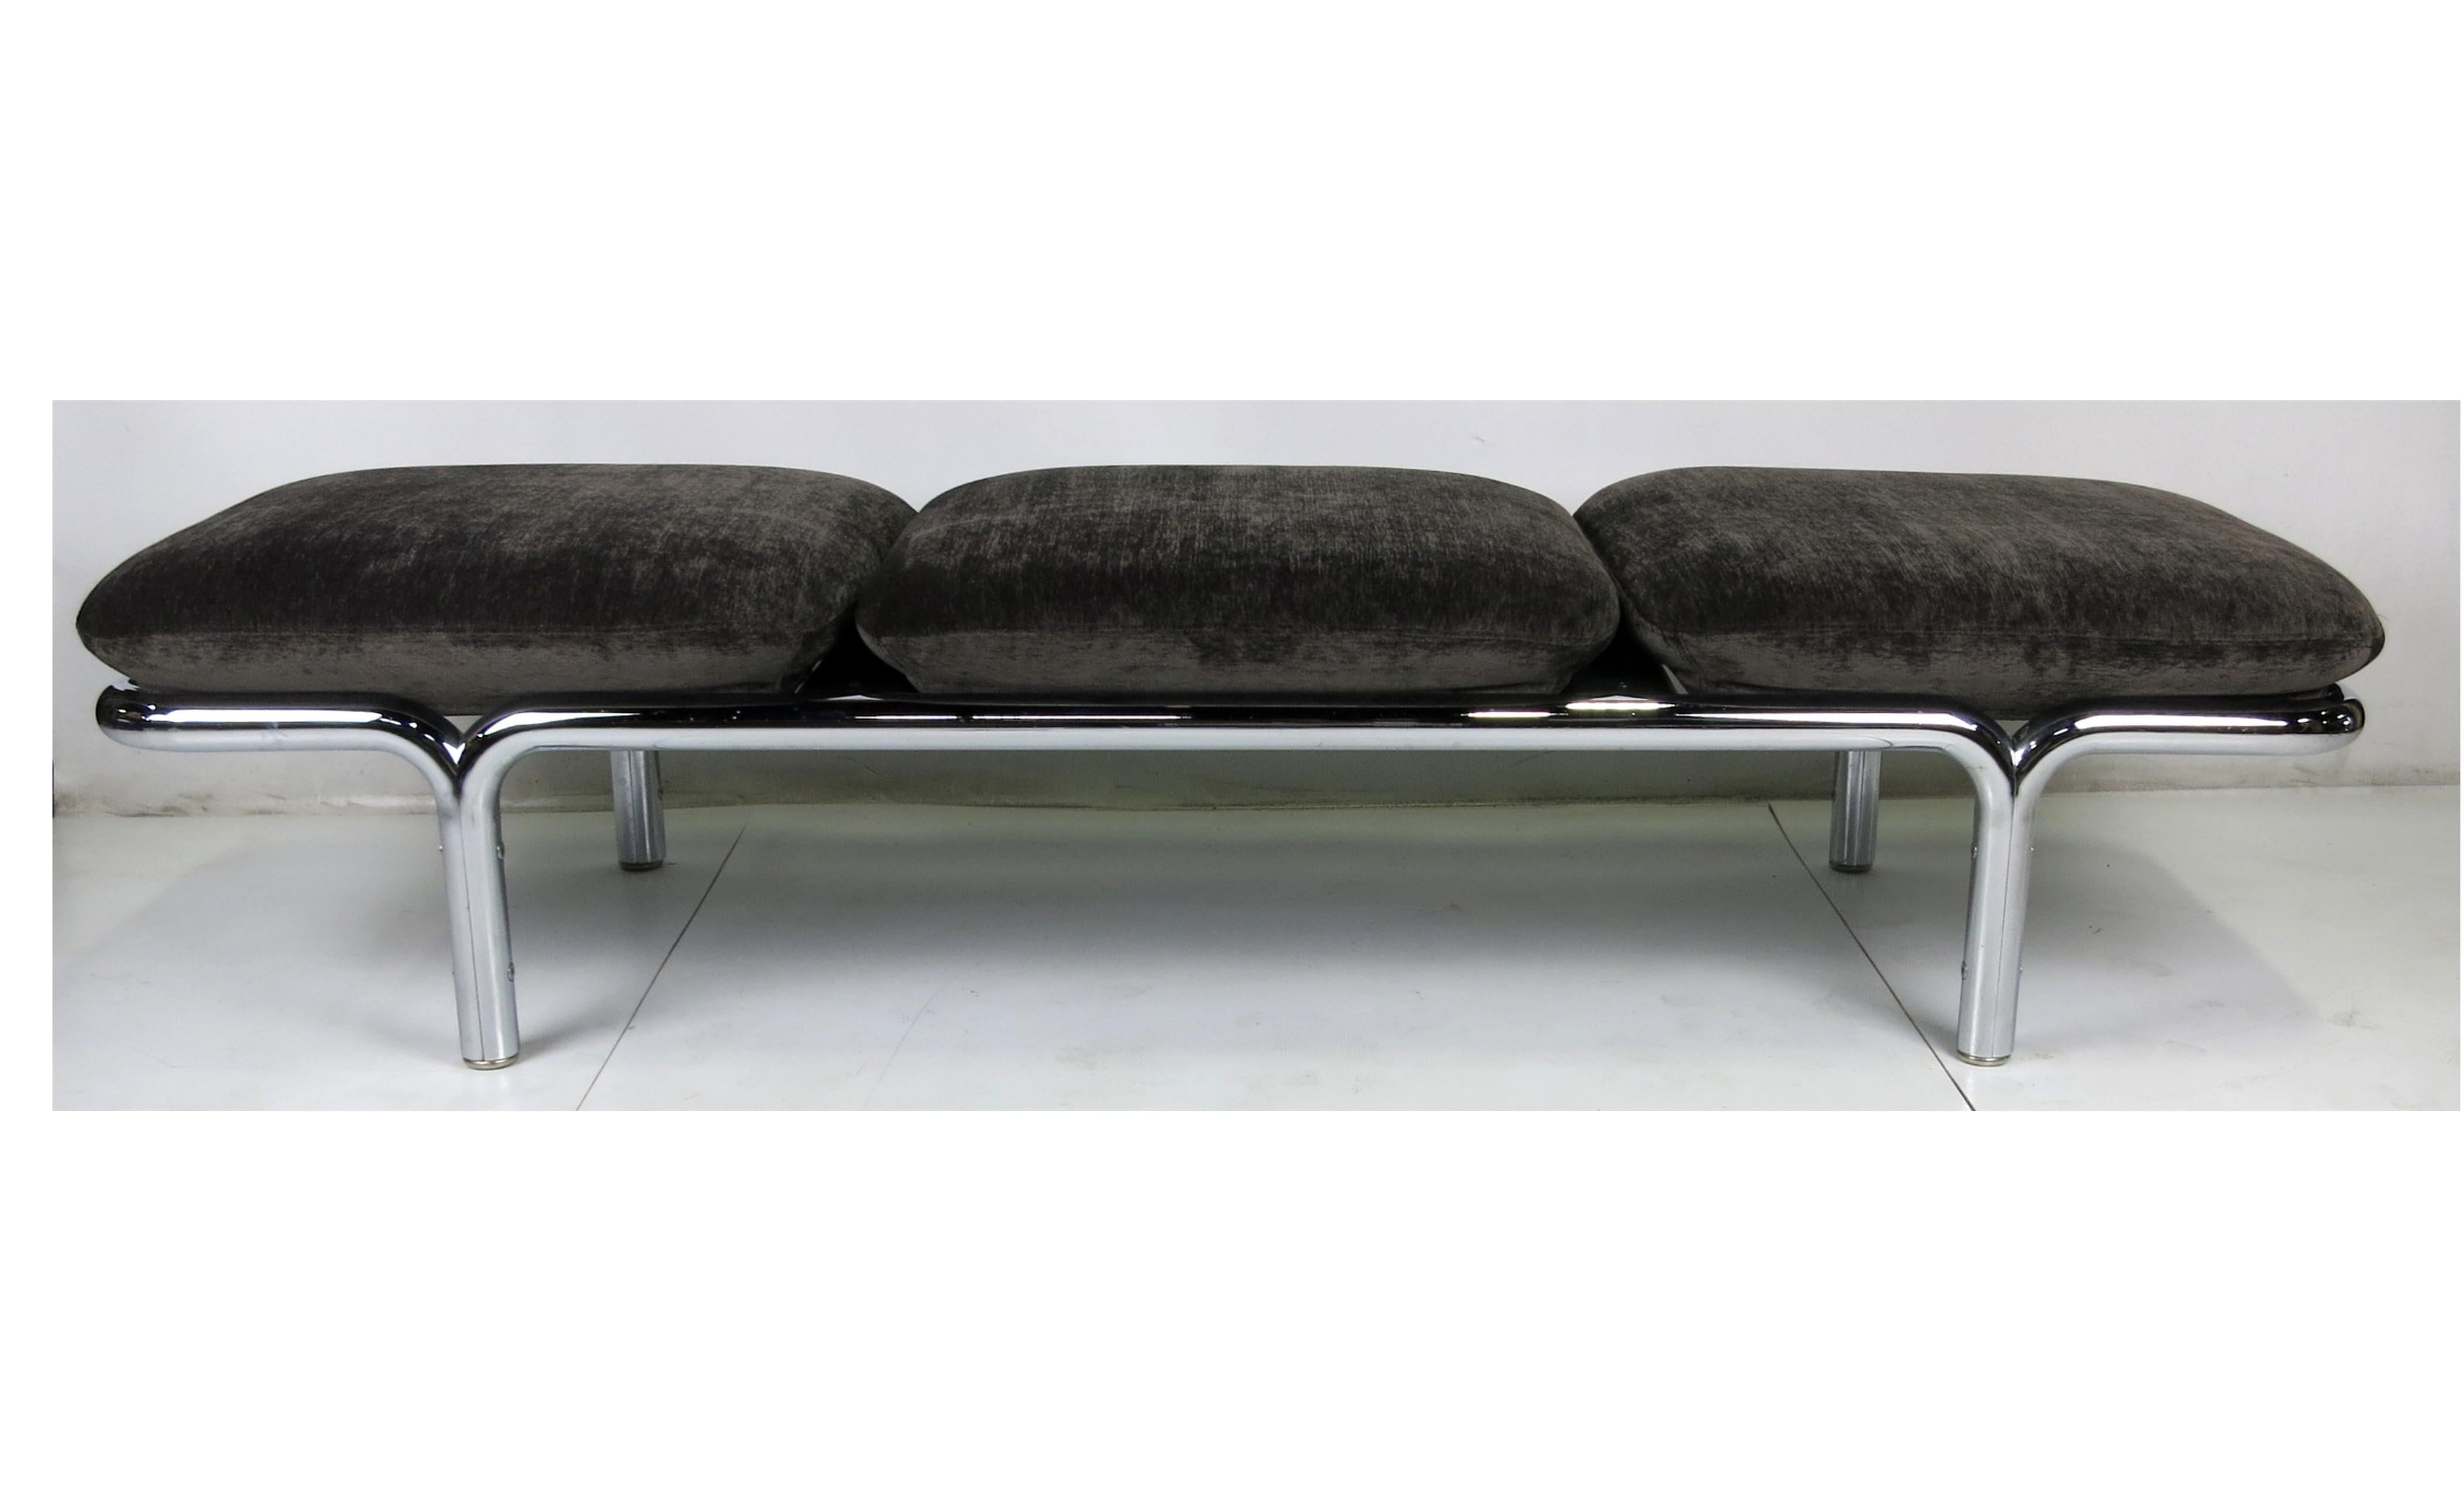 Large-scale chrome gallery bench with three well padded cushions, freshly upholstered in charcoal grey chenille.